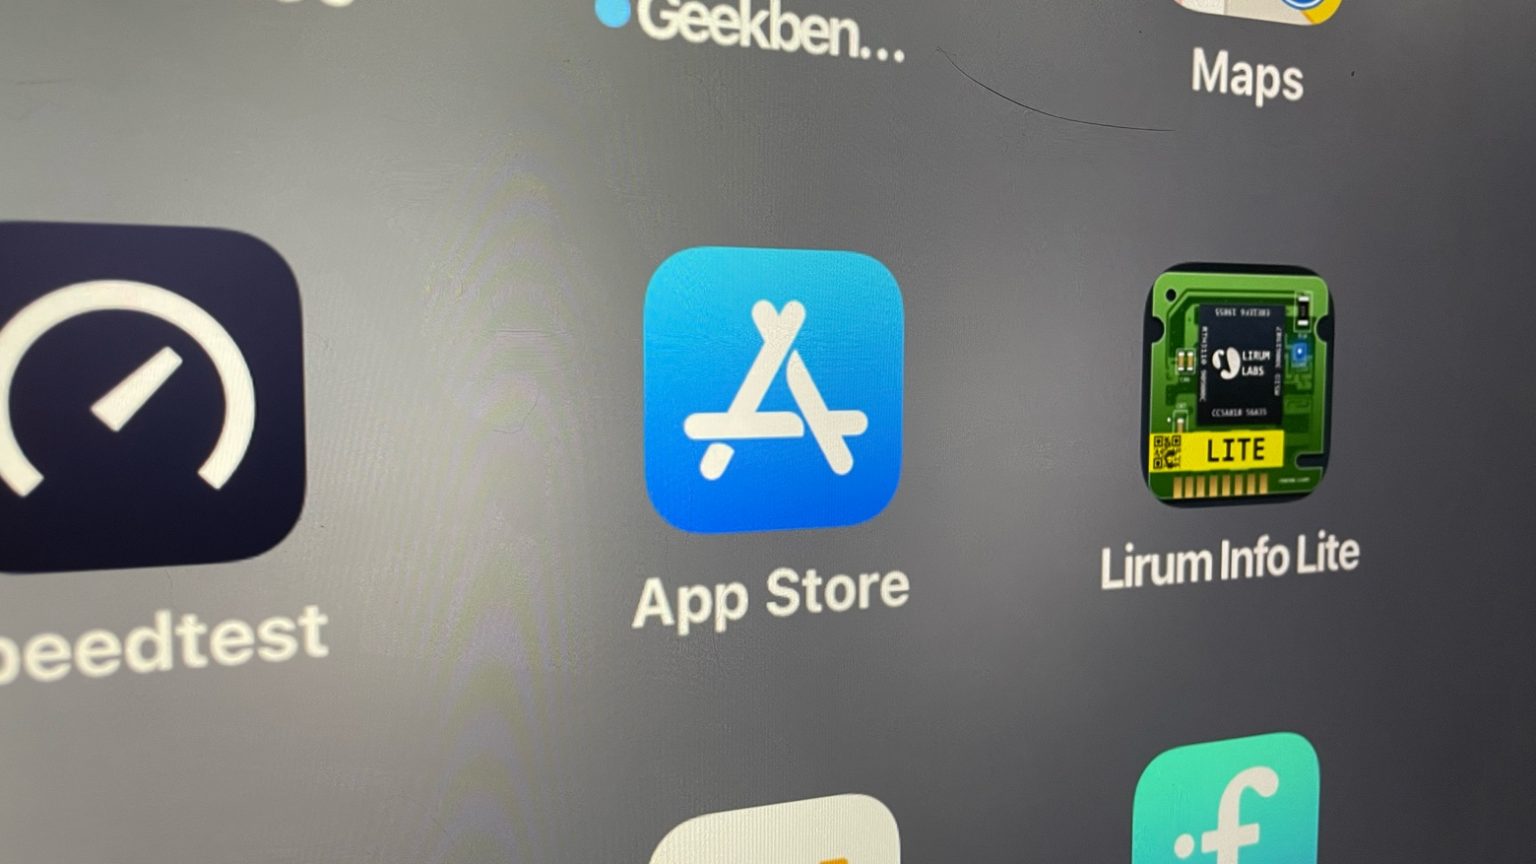 Read Epic Games' reasonable idea for opening up the App Store